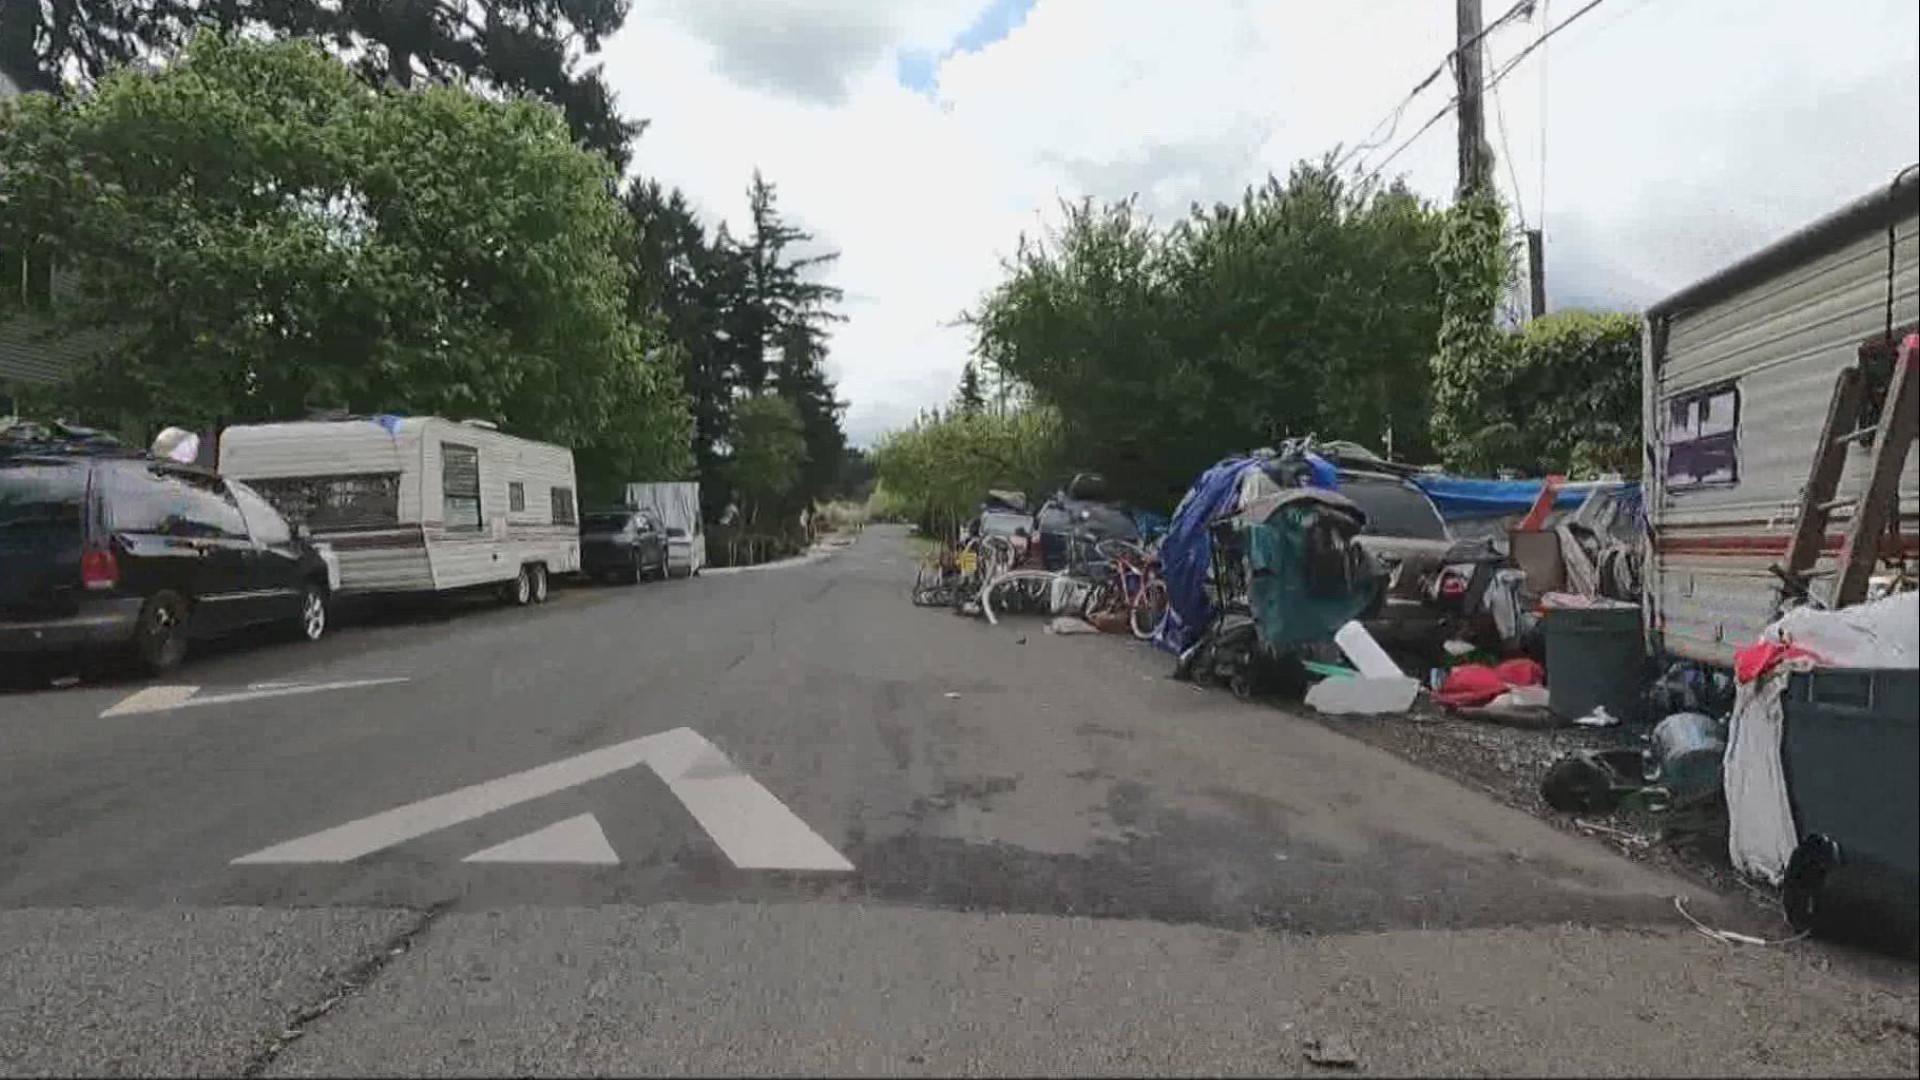 The camp on 157th and Division has grown in recent years. Nearby apartment residents say they encounter violence and property damage on a weekly basis.